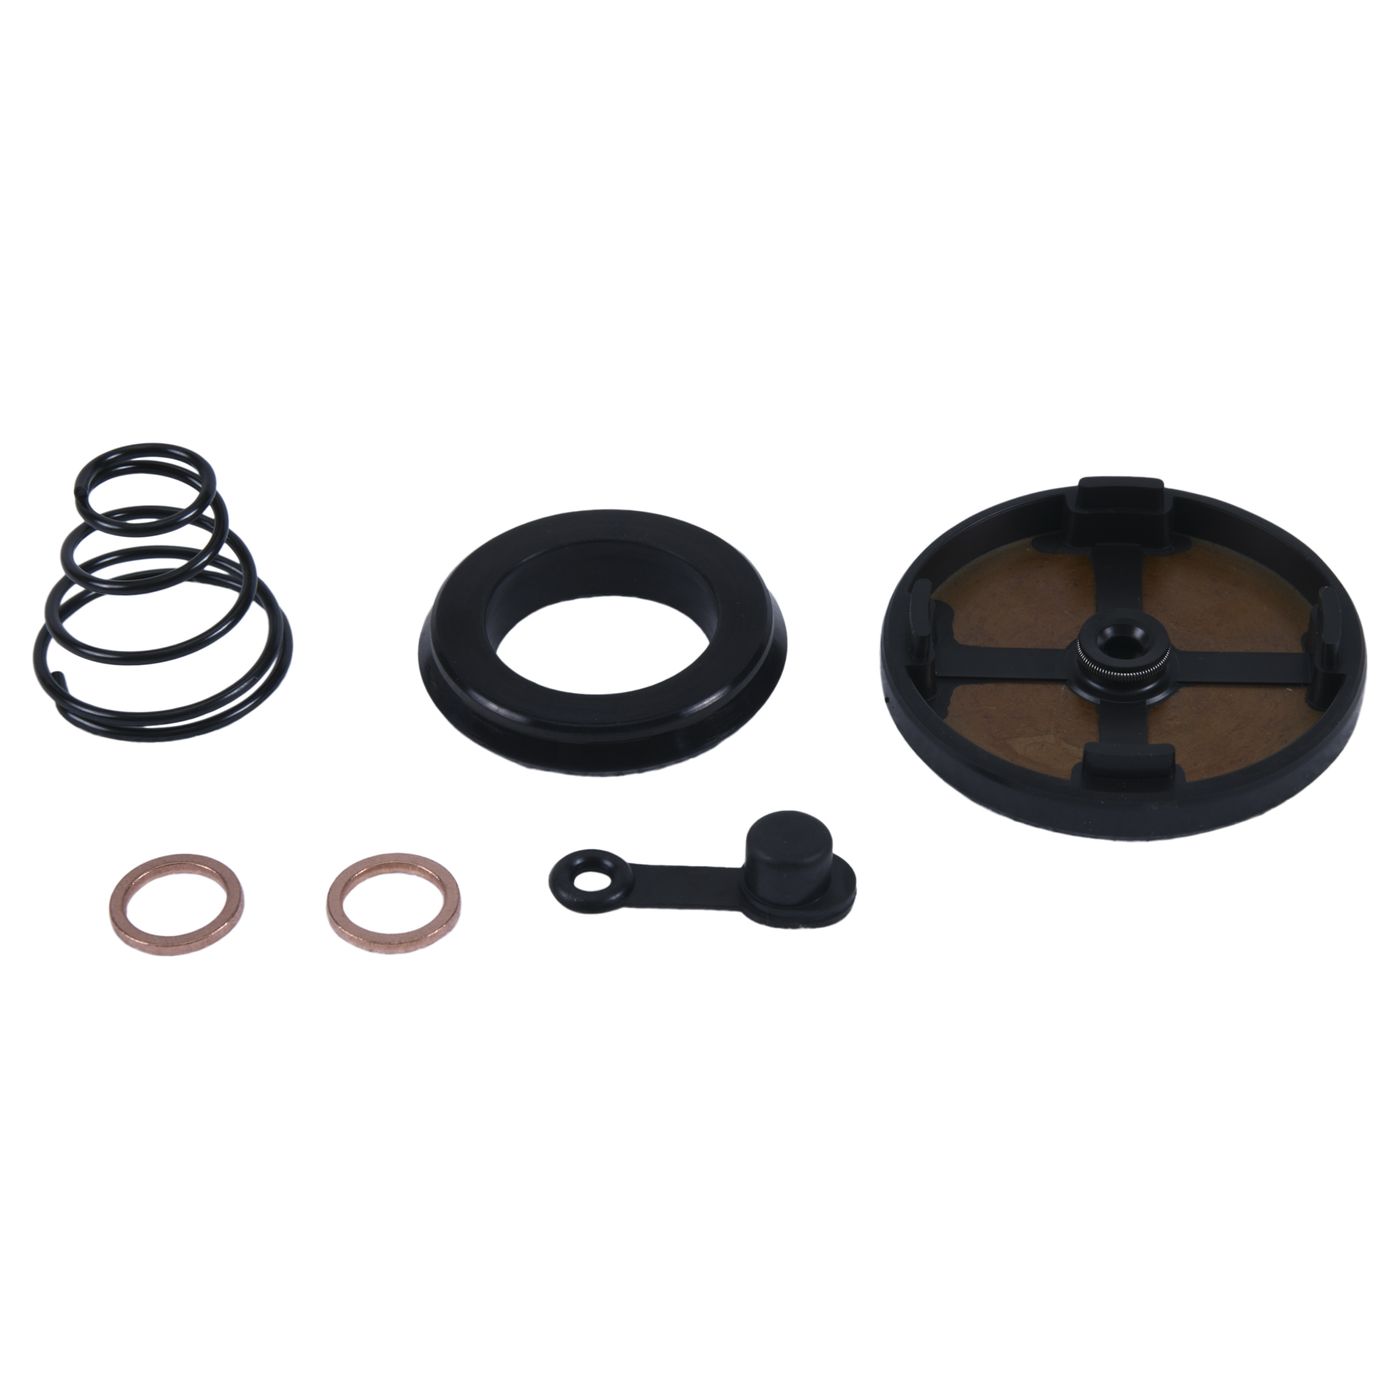 Wrp Clutch Slave Cylinder Kits - WRP186028 image